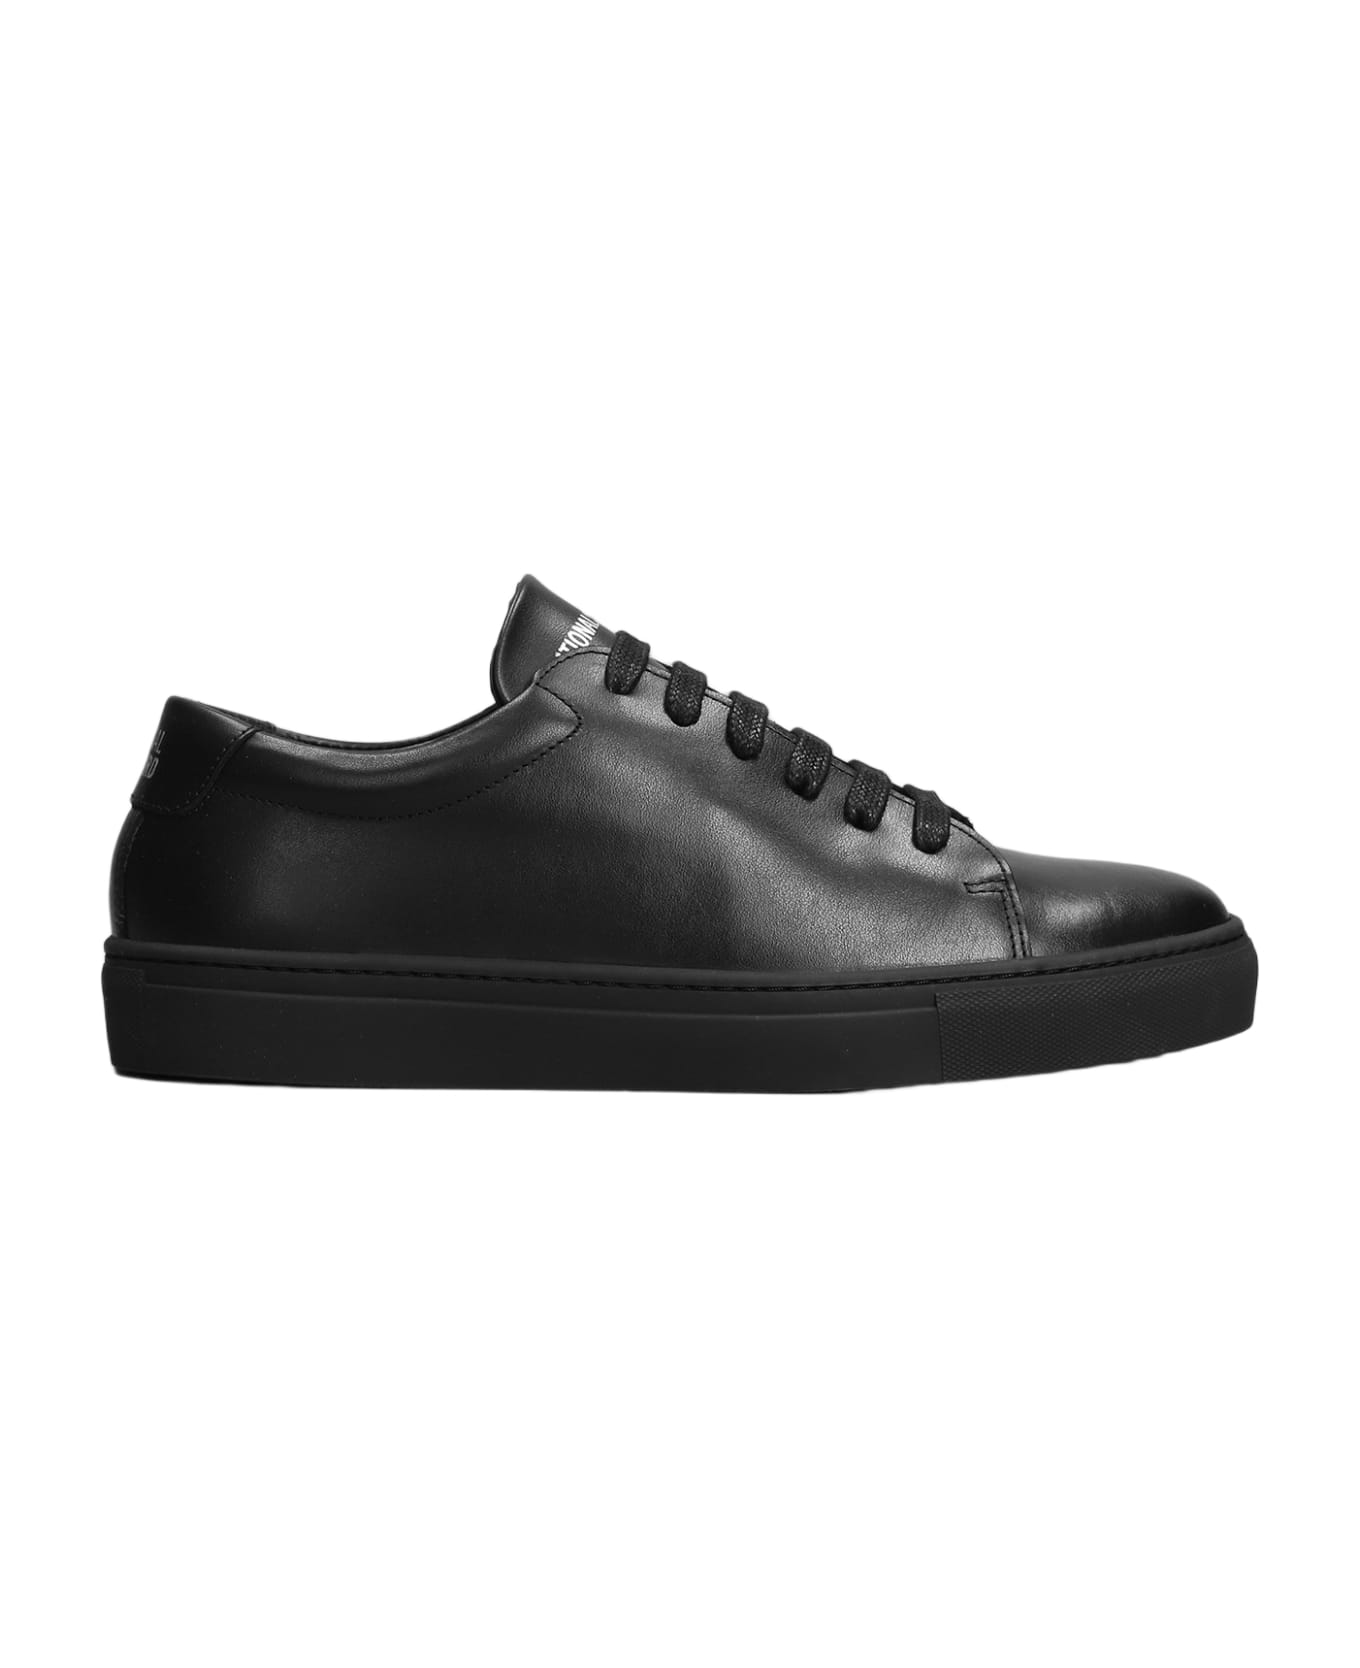 National Standard Edition 3 Sneakers In Black Leather - black